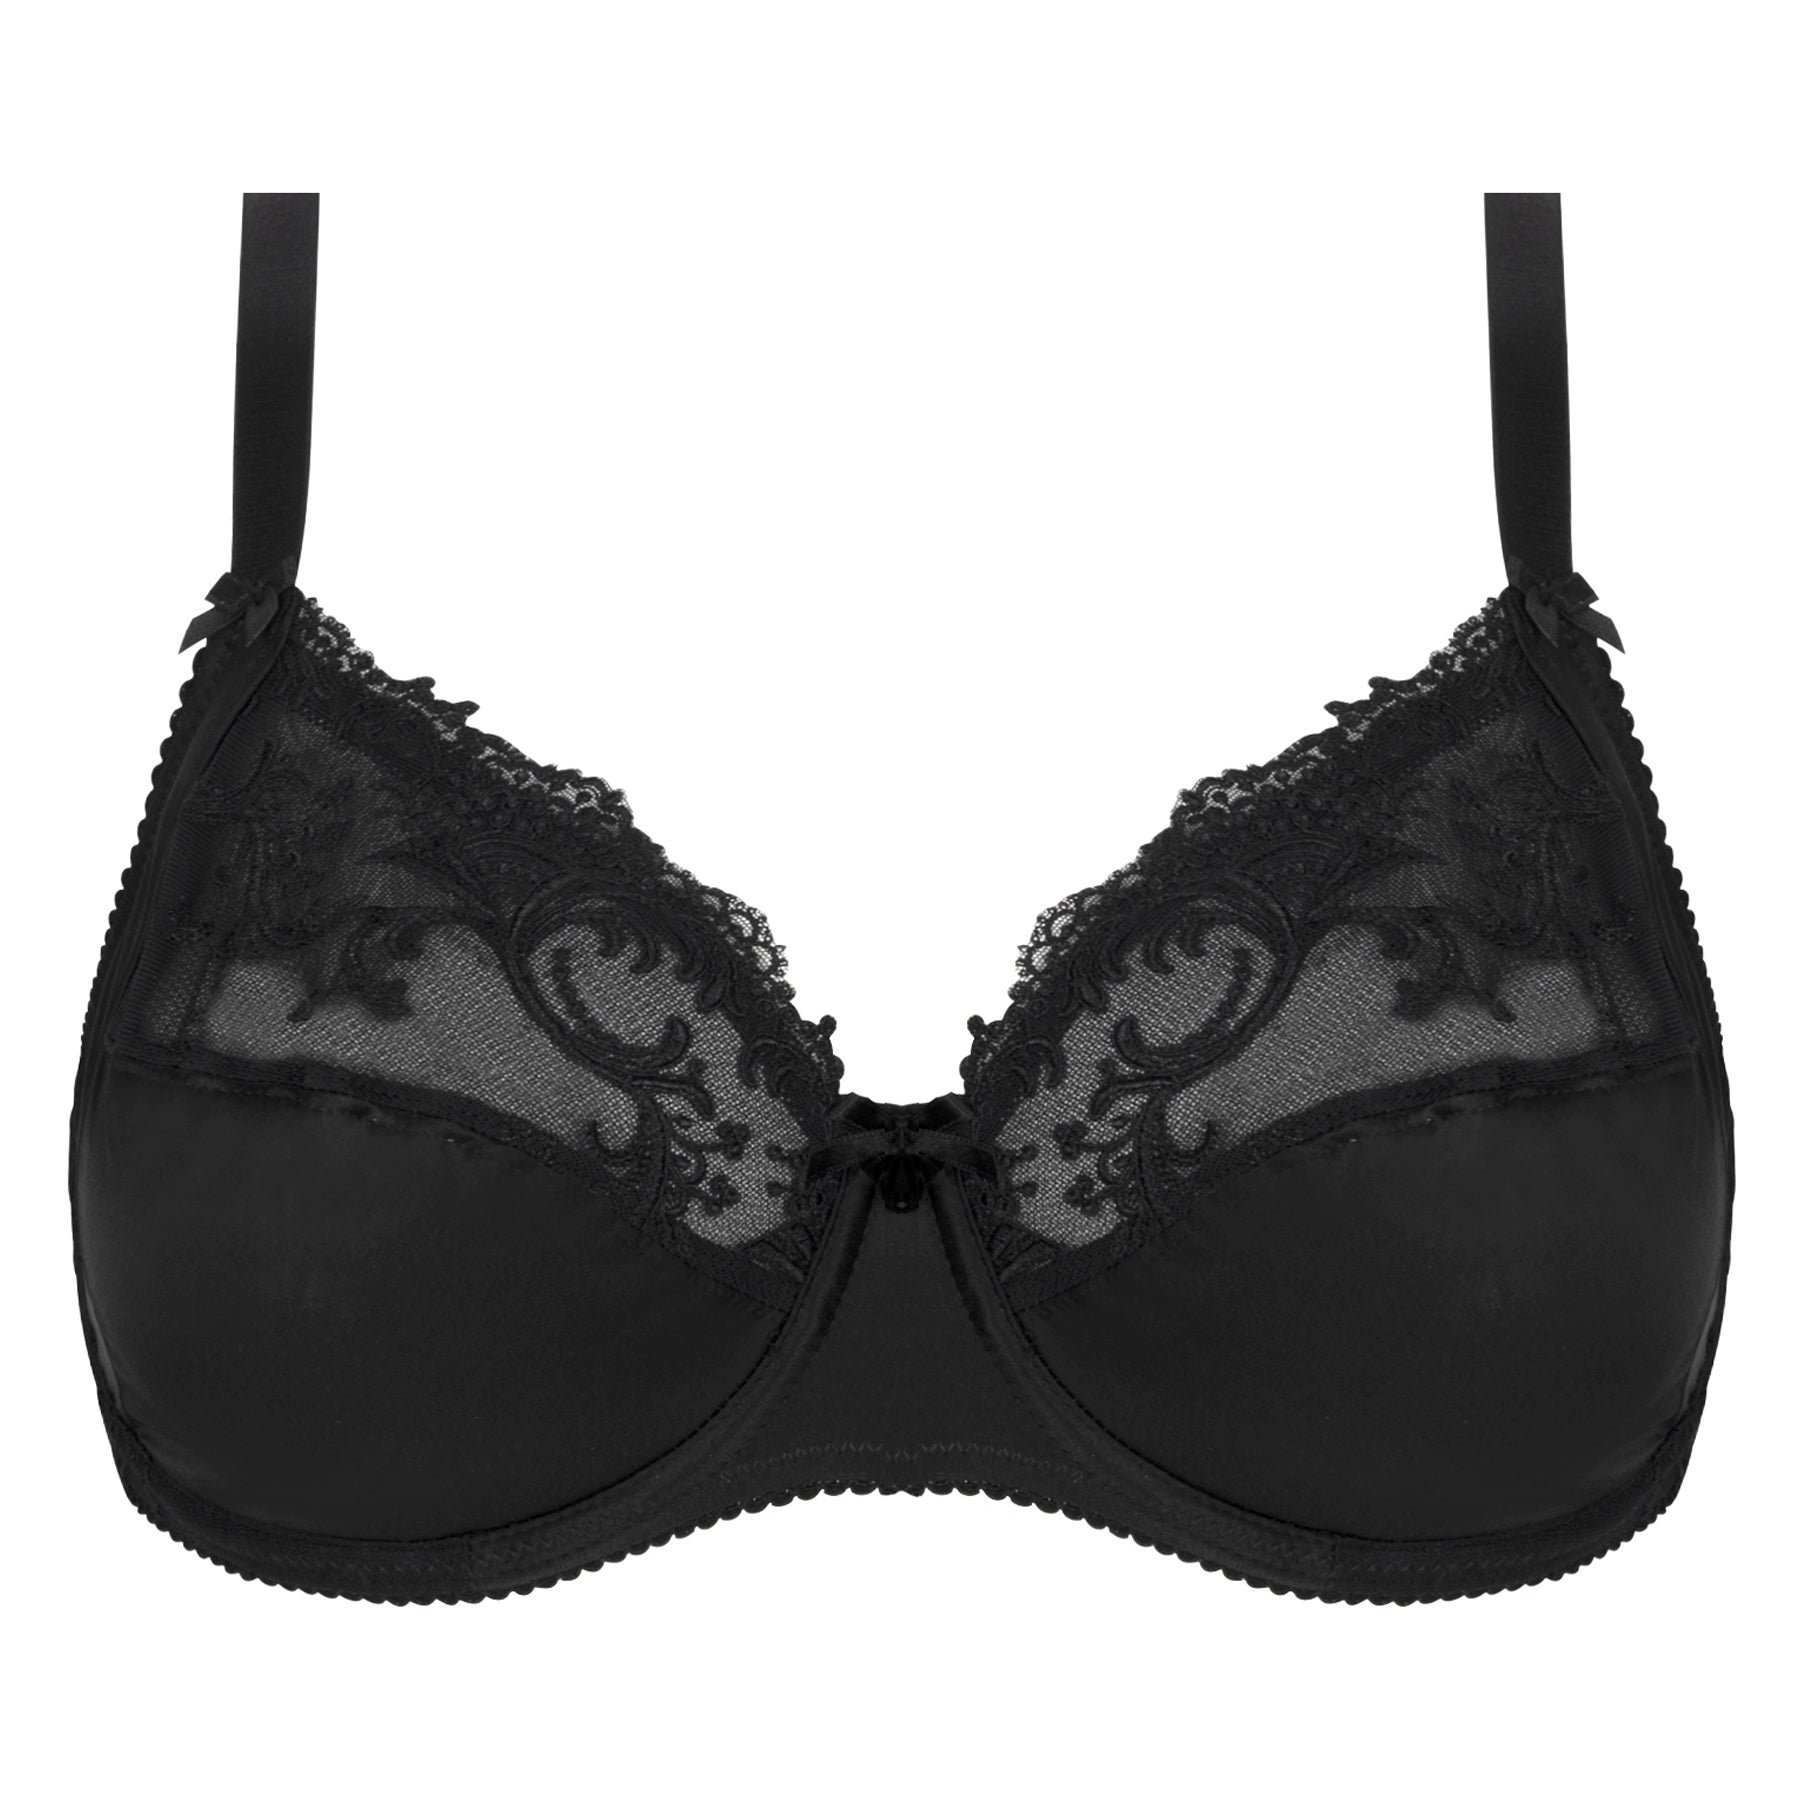 Goods - Our #lingerie department stocks a wide range of fashion bras up to  a GG cup and up to a K cup in everyday bra lines.⁠ ⁠   ⁠ #sexy #love #